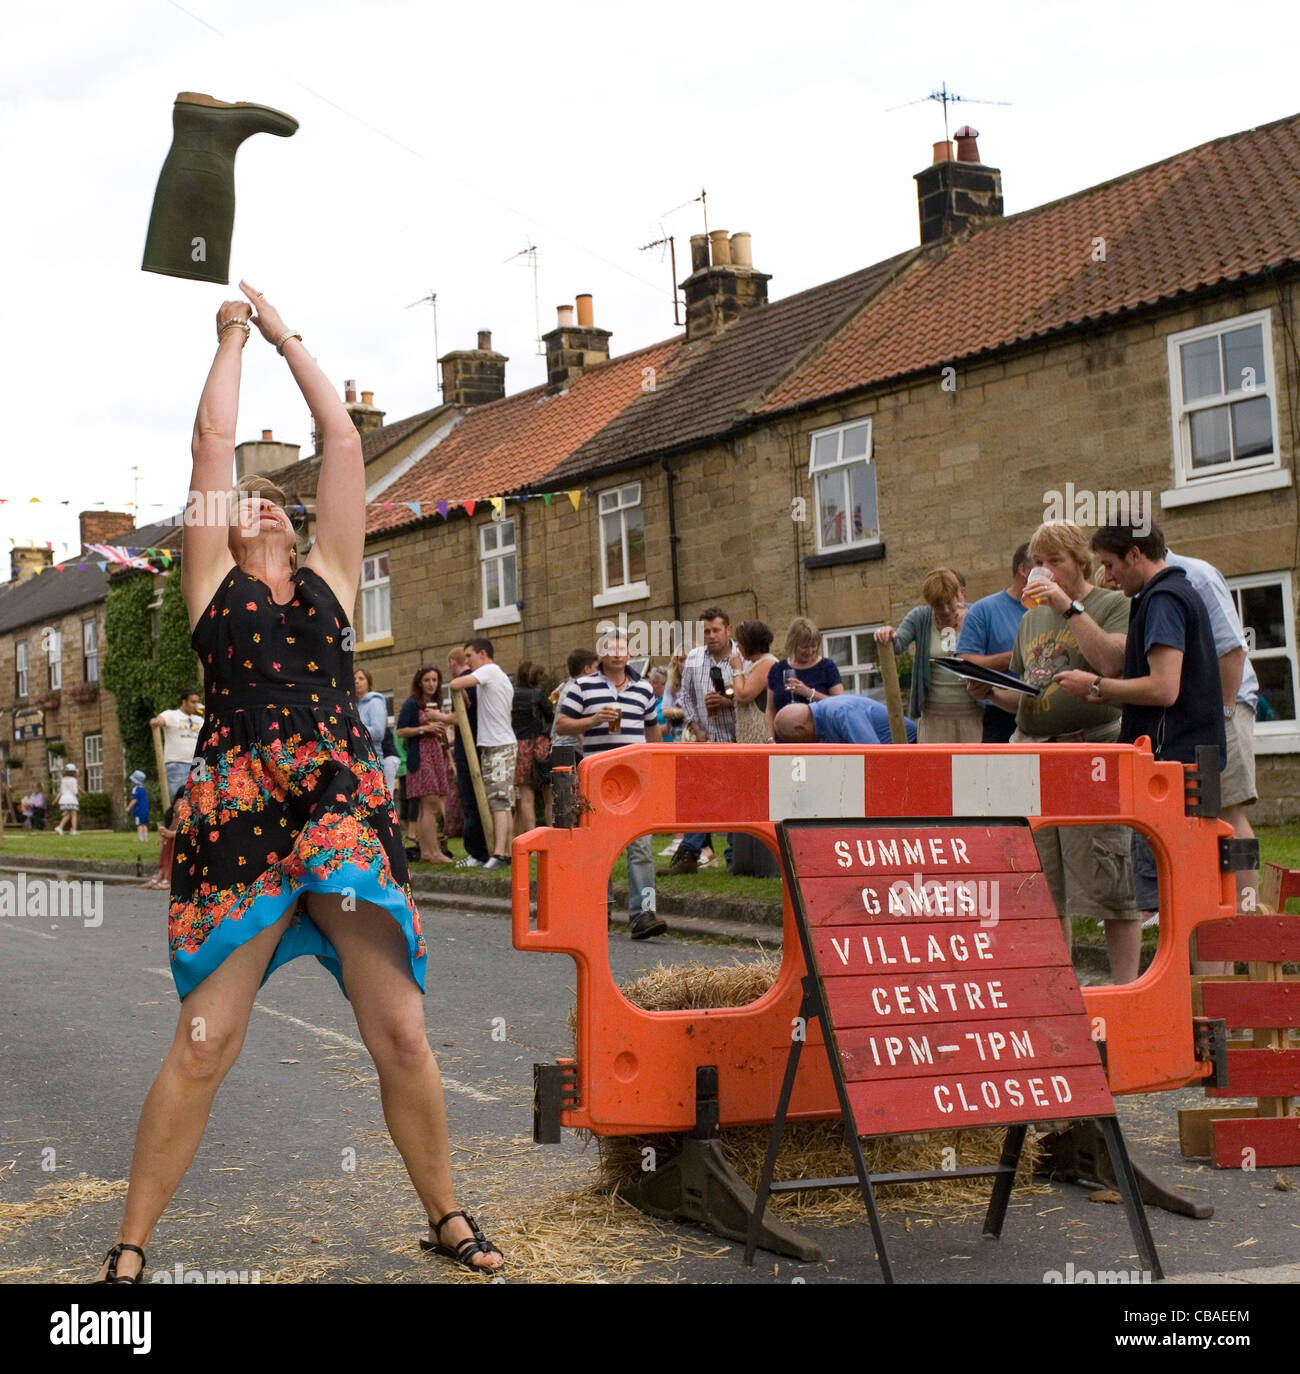 Lady Tossing Welly during Osmotherley Village Summer Games North Yorkshire England Stock Photo